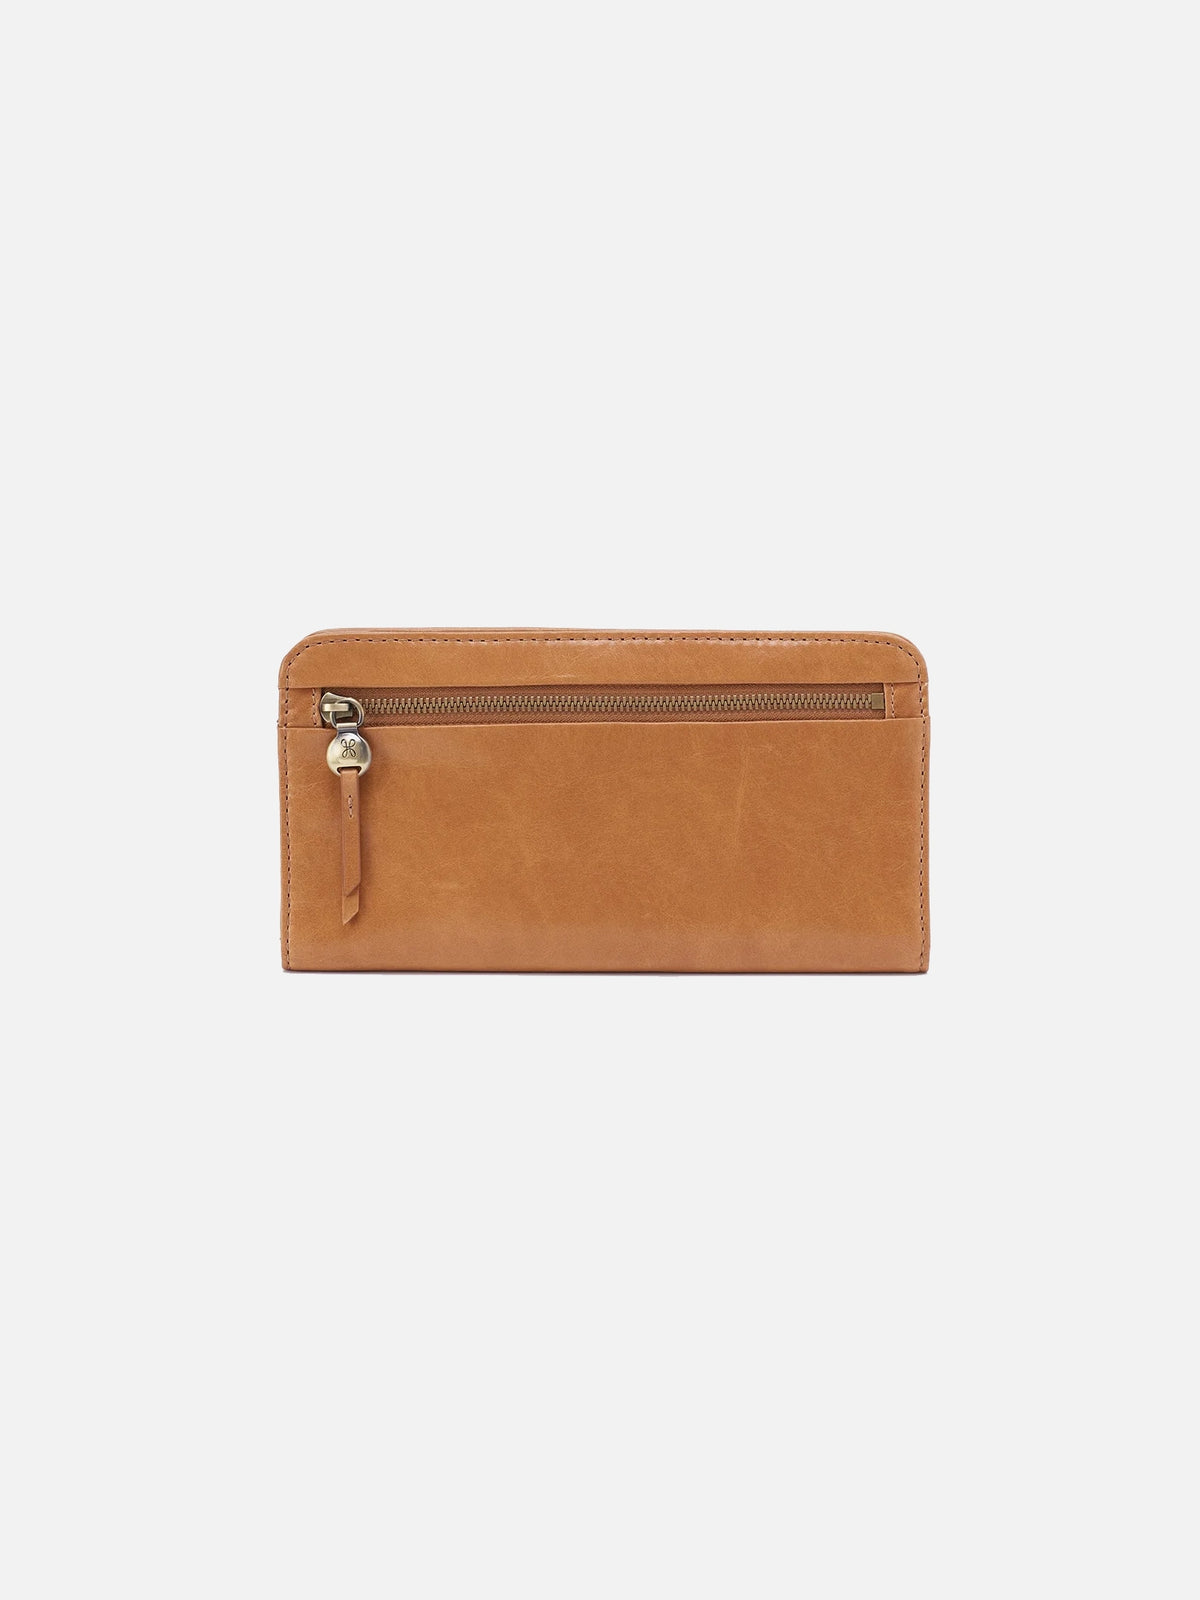 hobo angle continental wallet in natural polished leather